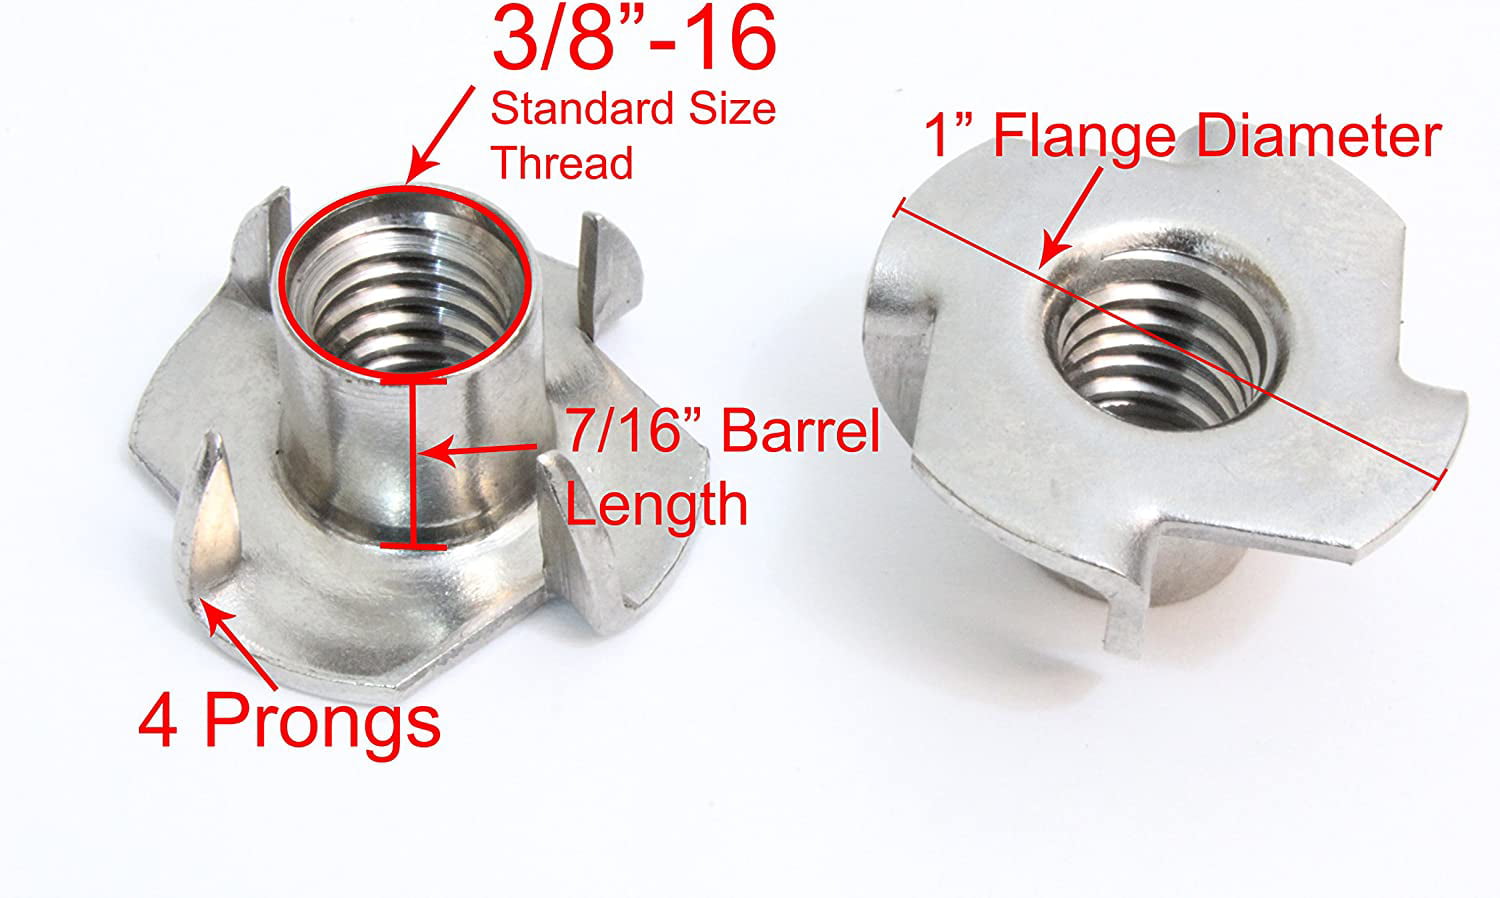 #8-32 X 1/4 Pronged Tee Nut. 8-32 Stainless T-Nuts 25 Pack by Bolt Dropper Choose Size/Quantity Threaded Insert 